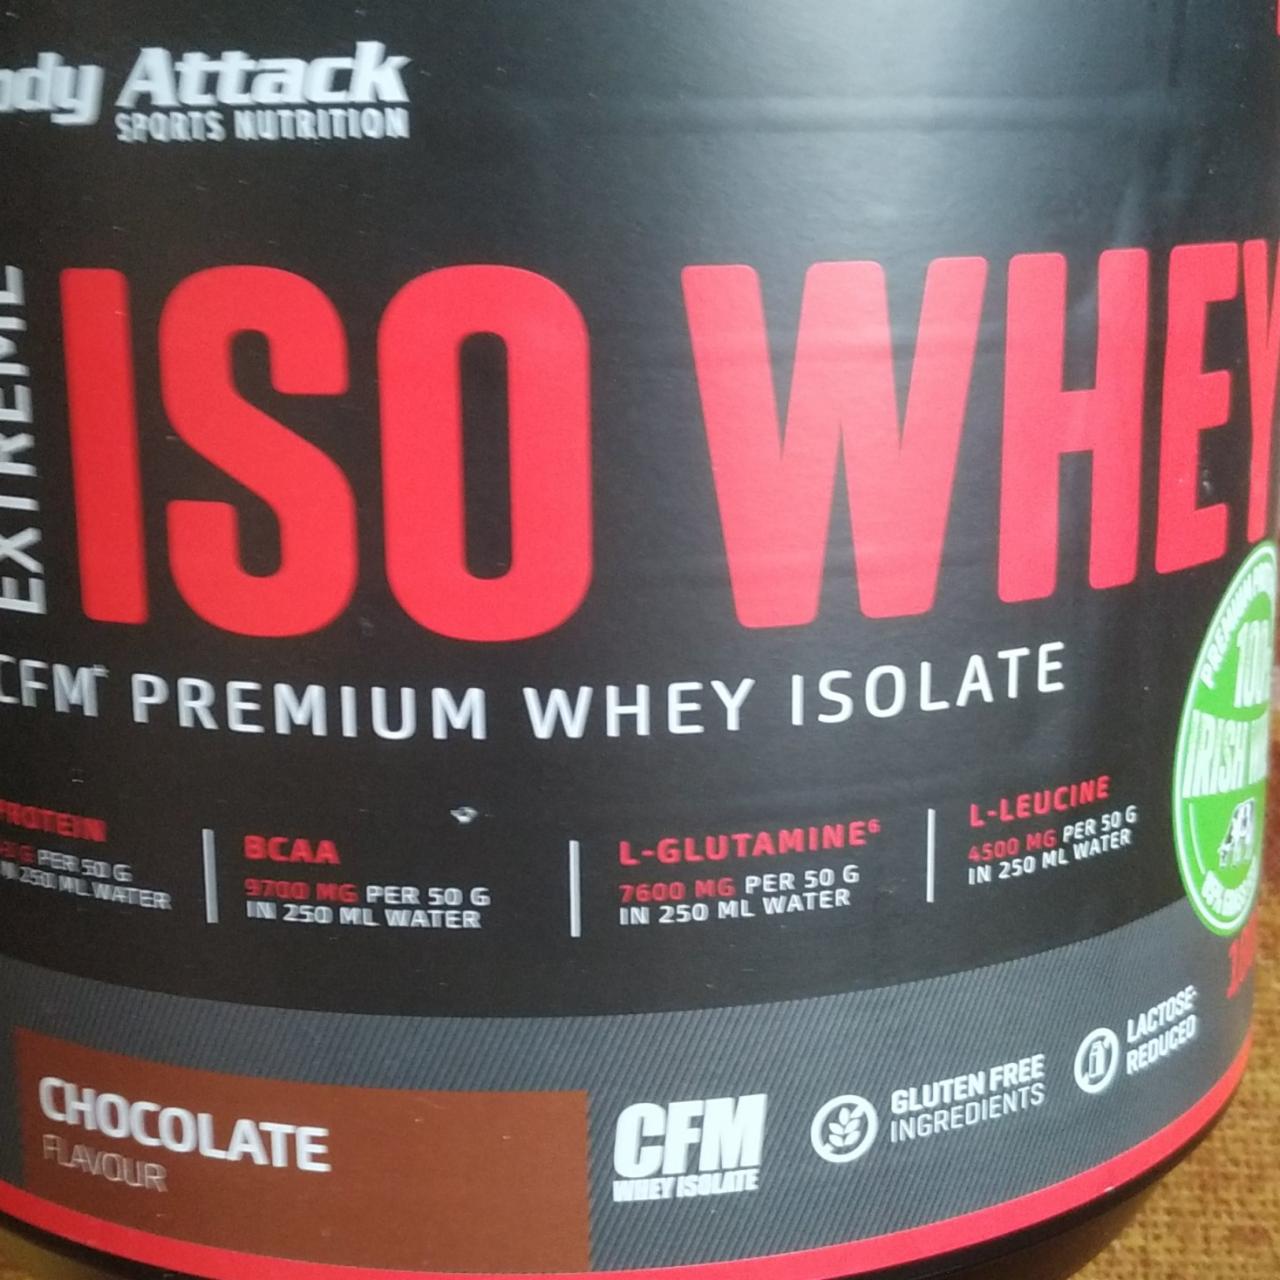 Fotografie - Extreme iso whey Chocolate Body Attack